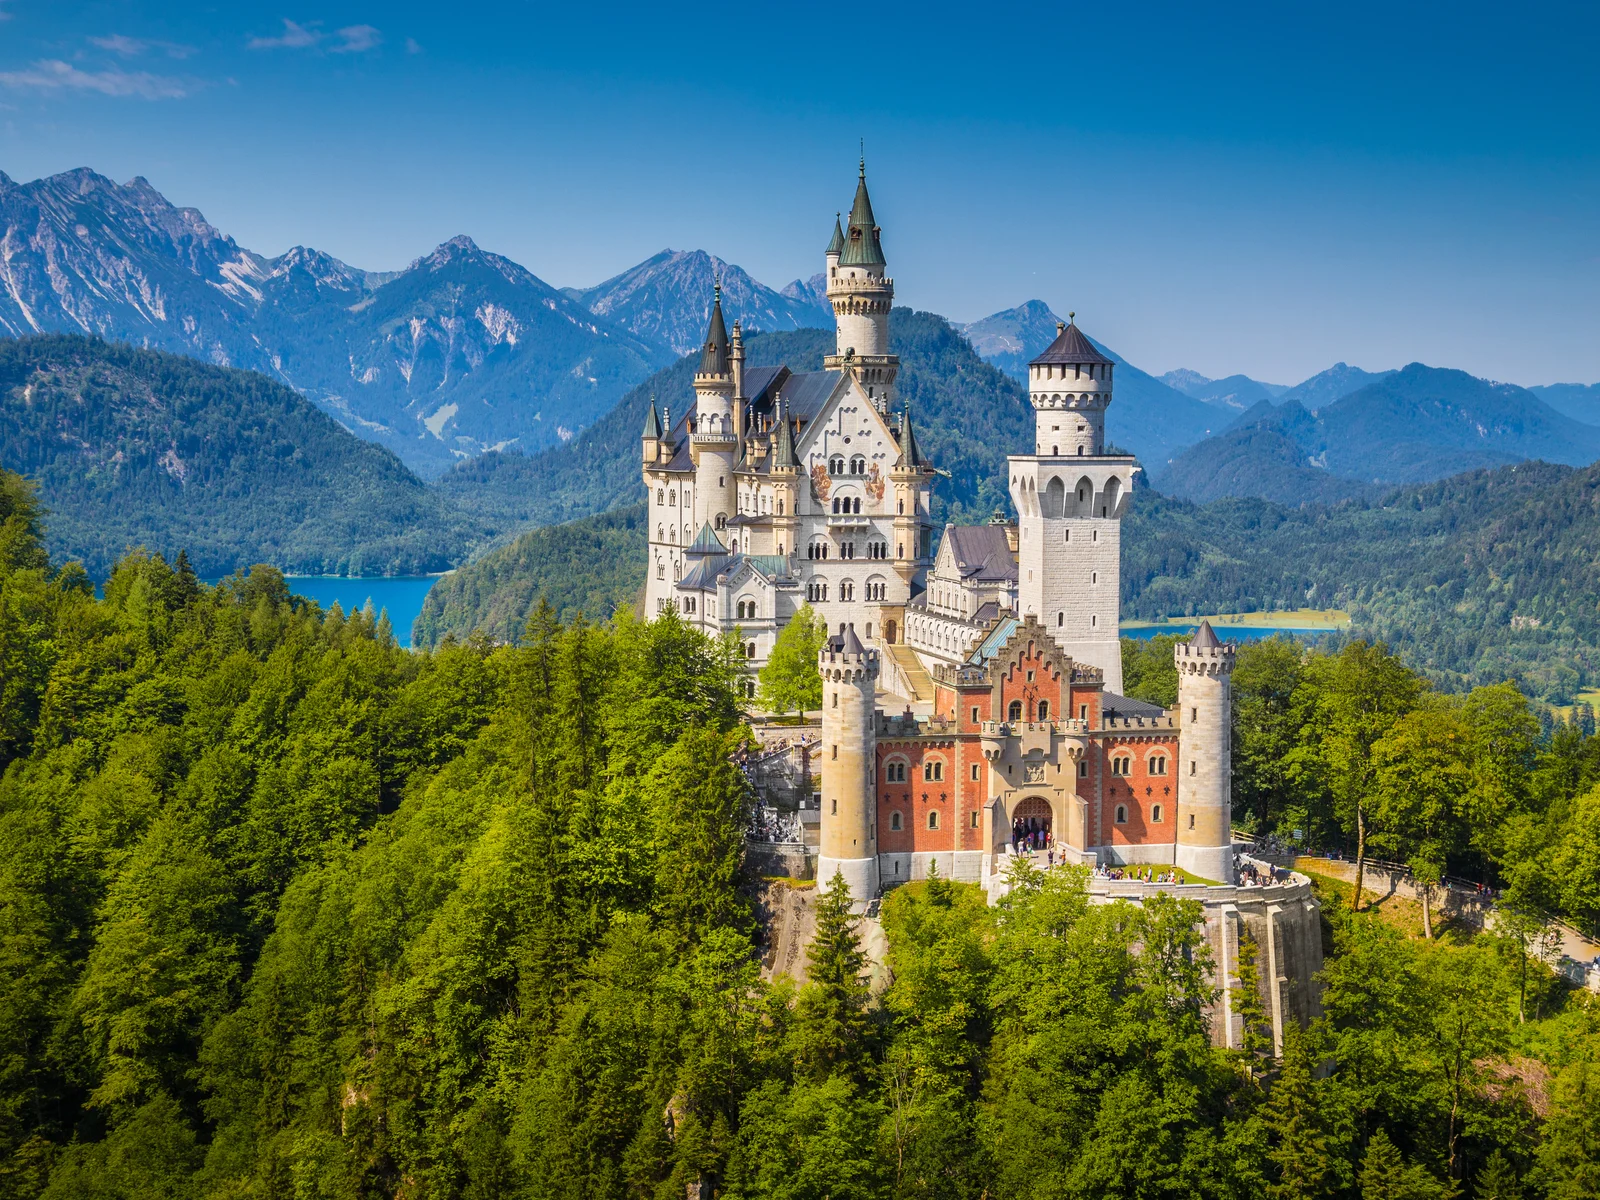 Neuschwanstein Castle against a mountain landscape during the best time to visit Germany